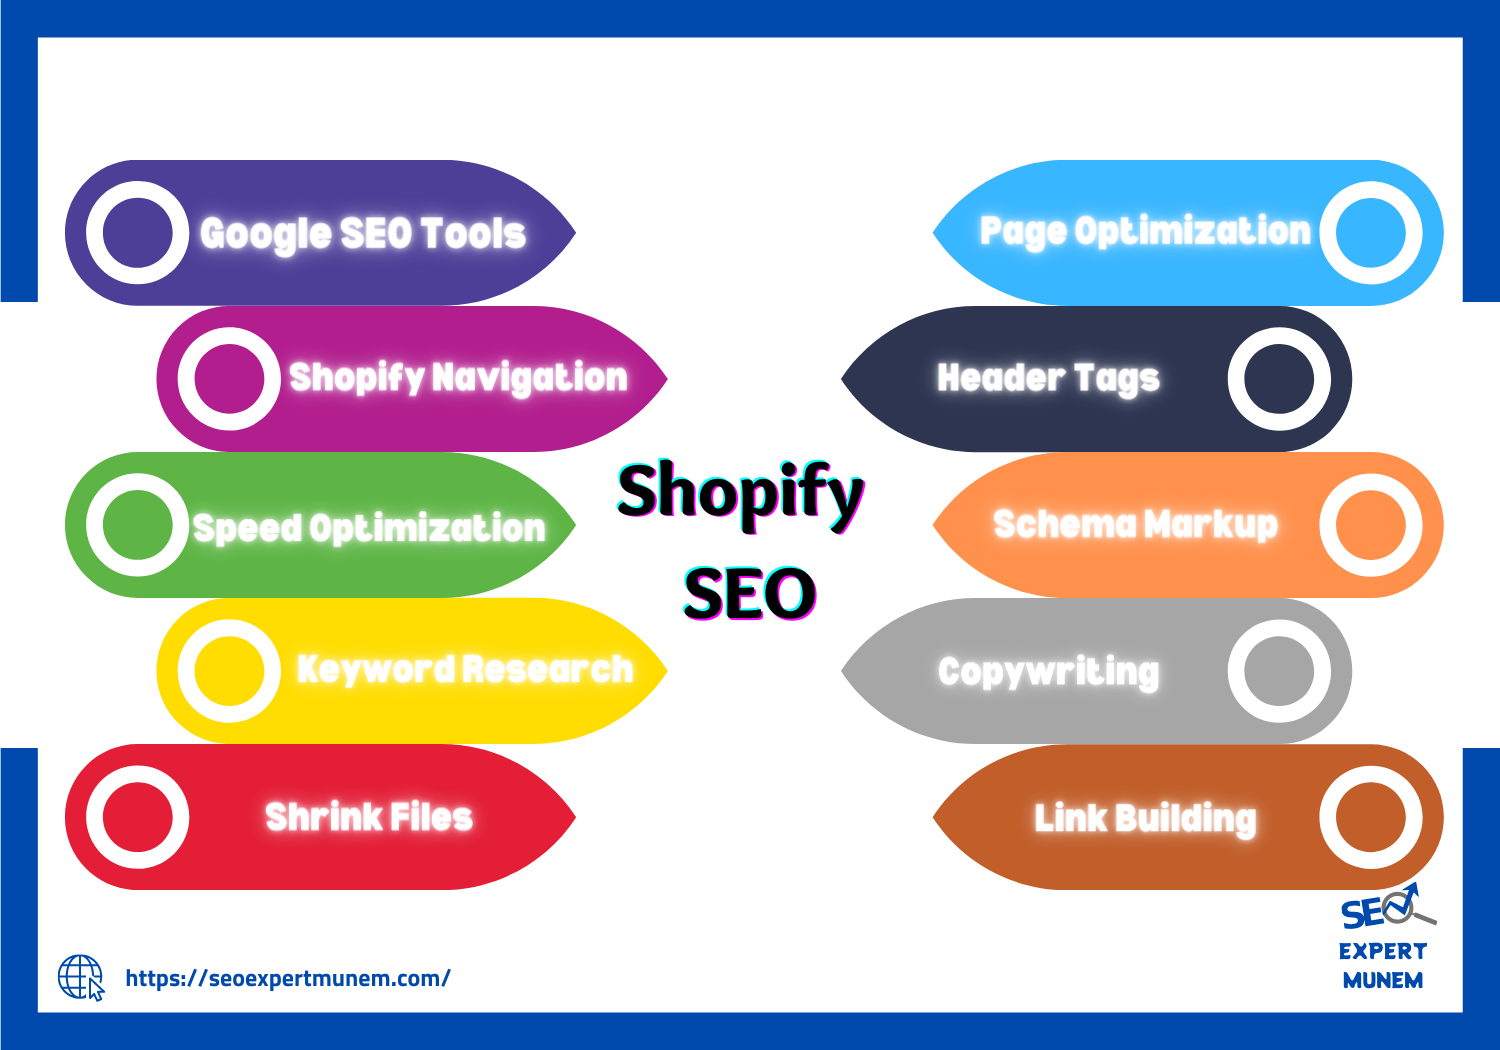 How Do Shopify Tags Affect SEO?